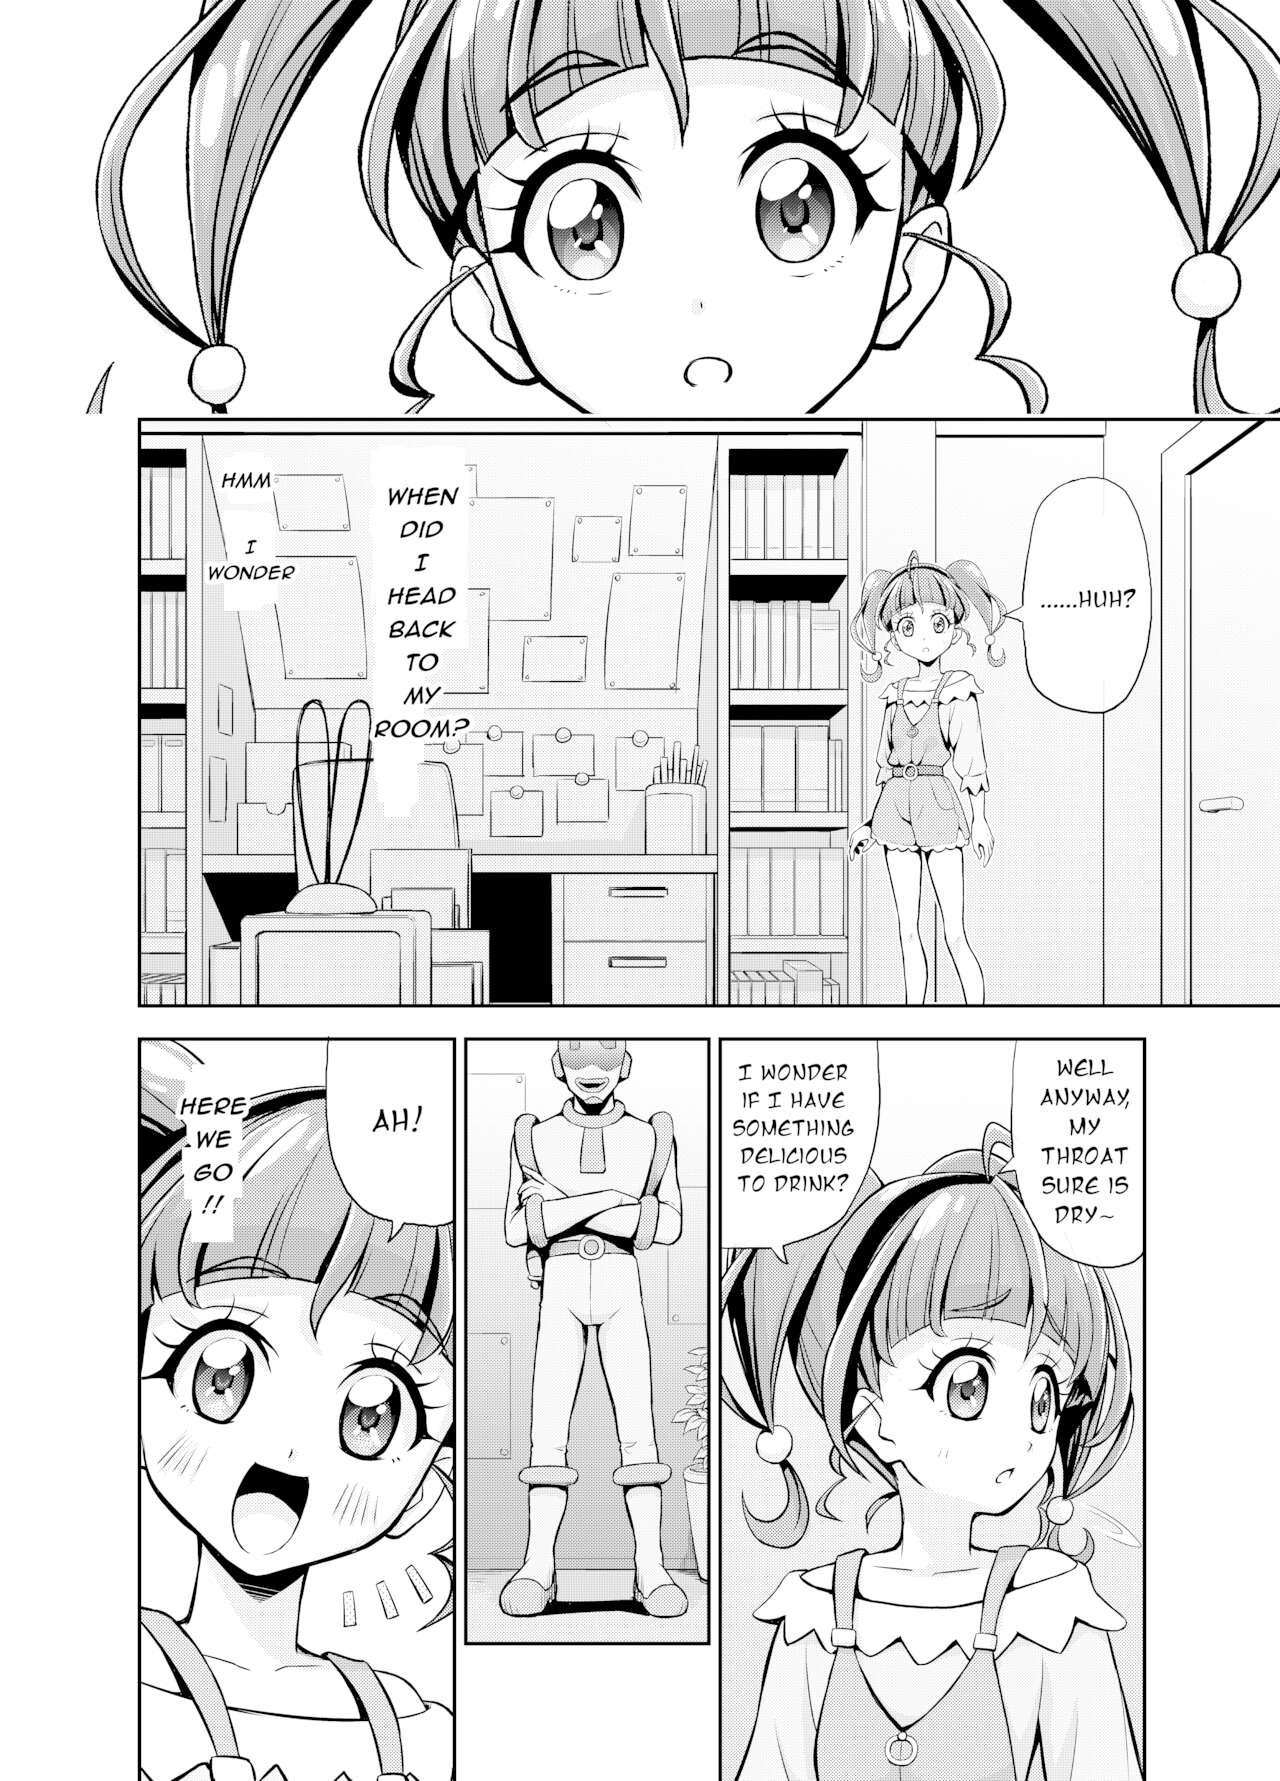 Phat Hoshi Asobi | Star Playtime Ch. 1-2 - Star twinkle precure Off - Page 5